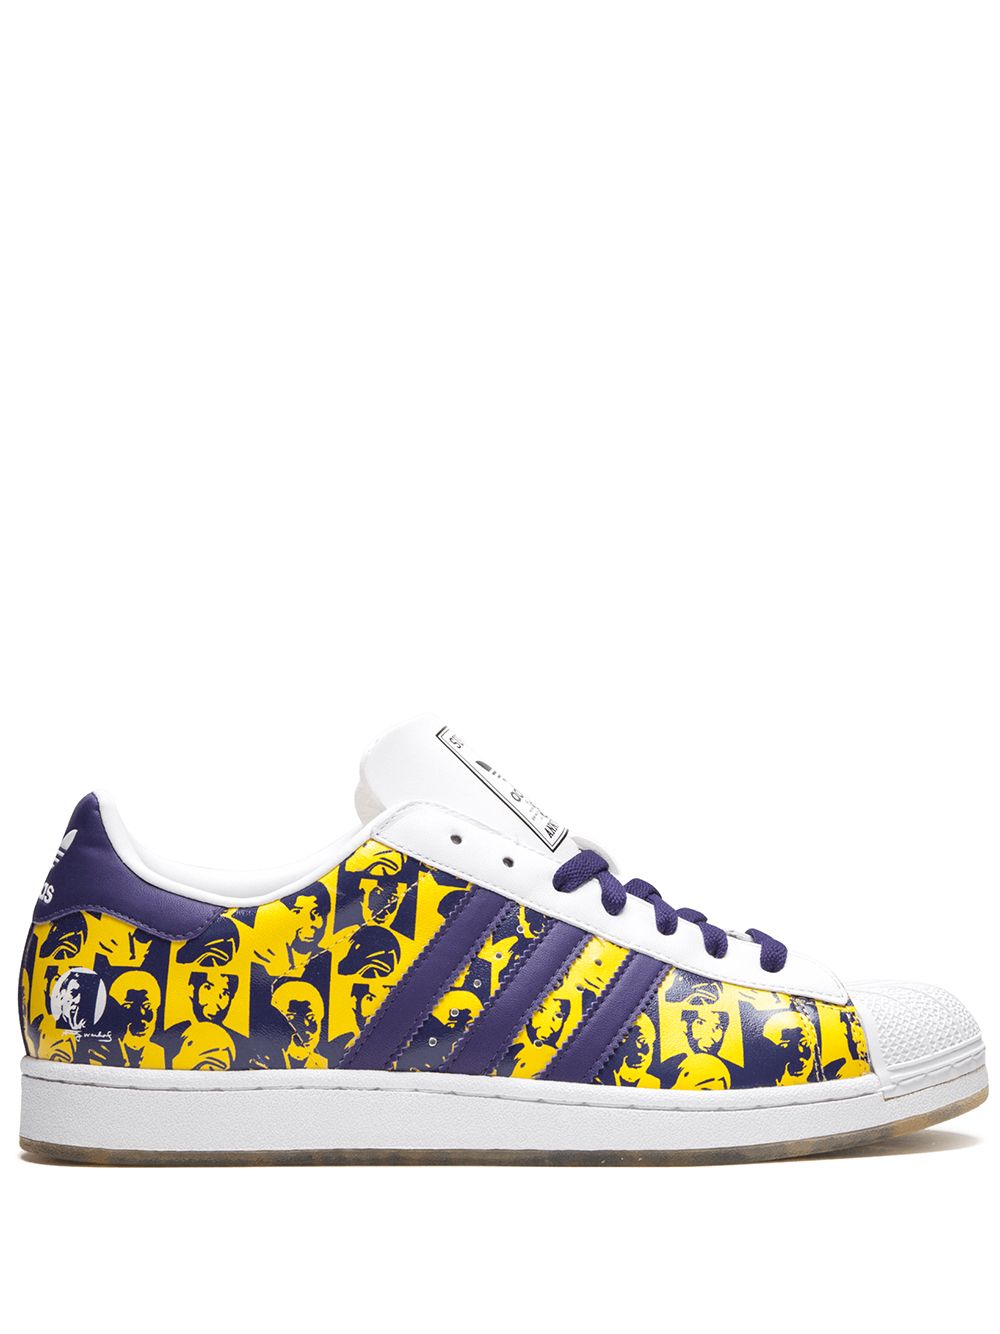 Superstar 1 Express "Andy Warhol" sneakers